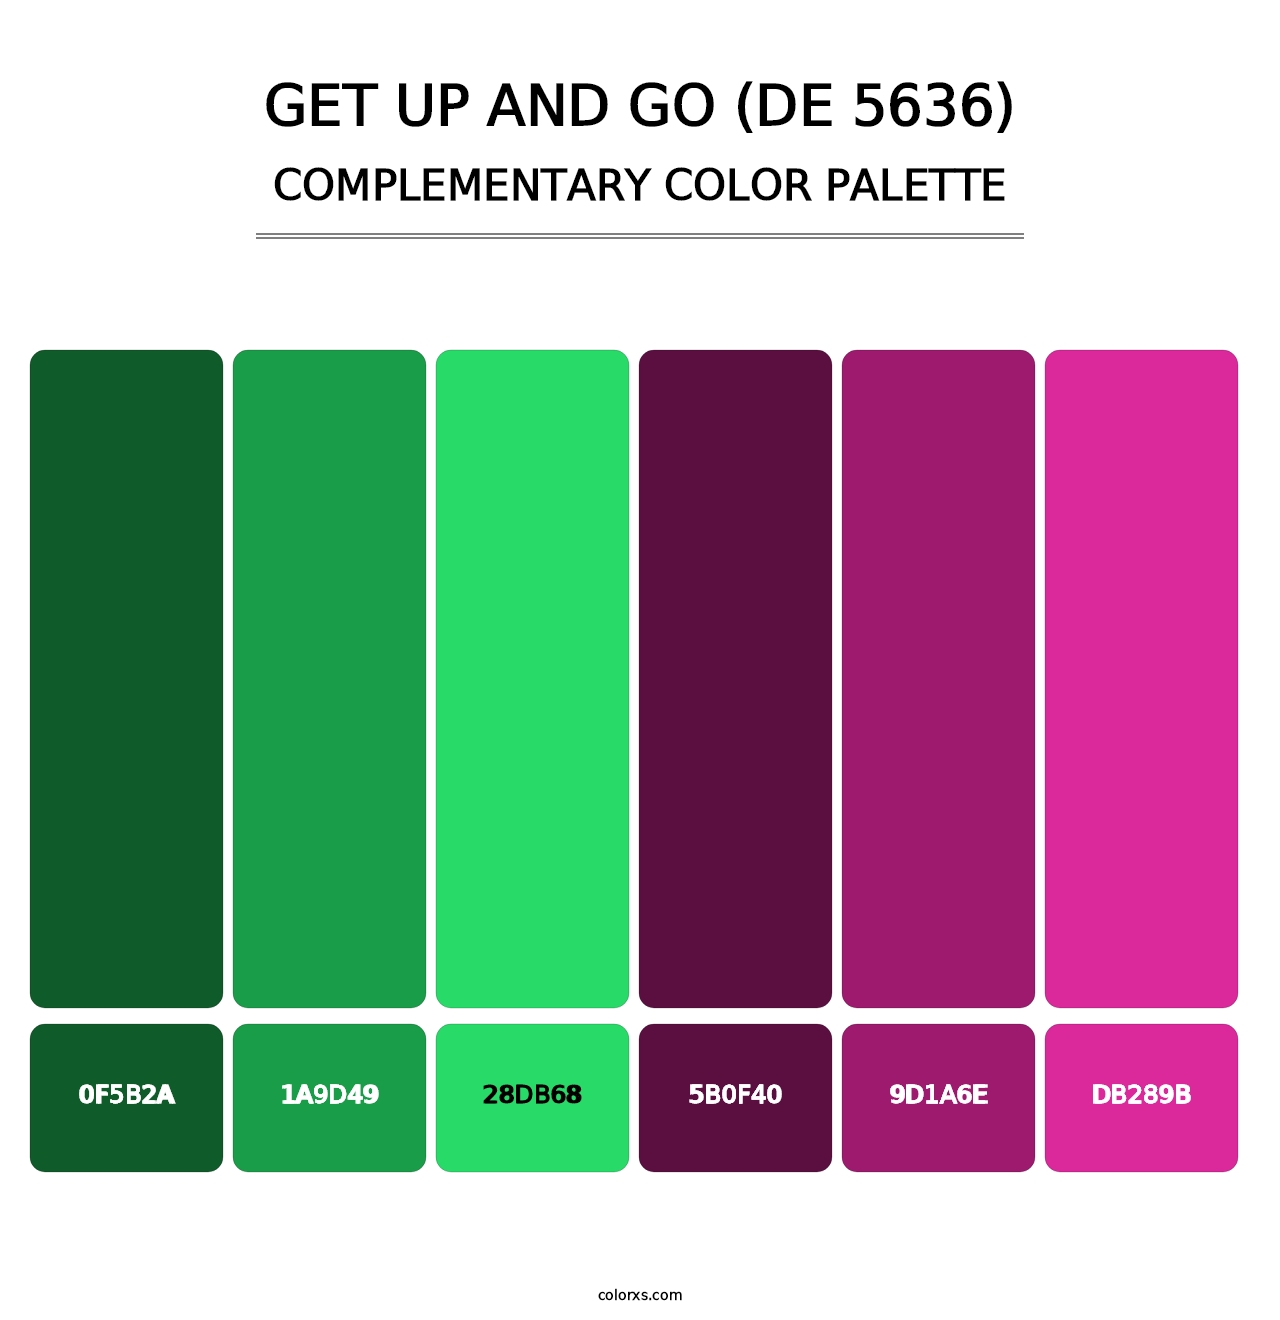 Get Up and Go (DE 5636) - Complementary Color Palette